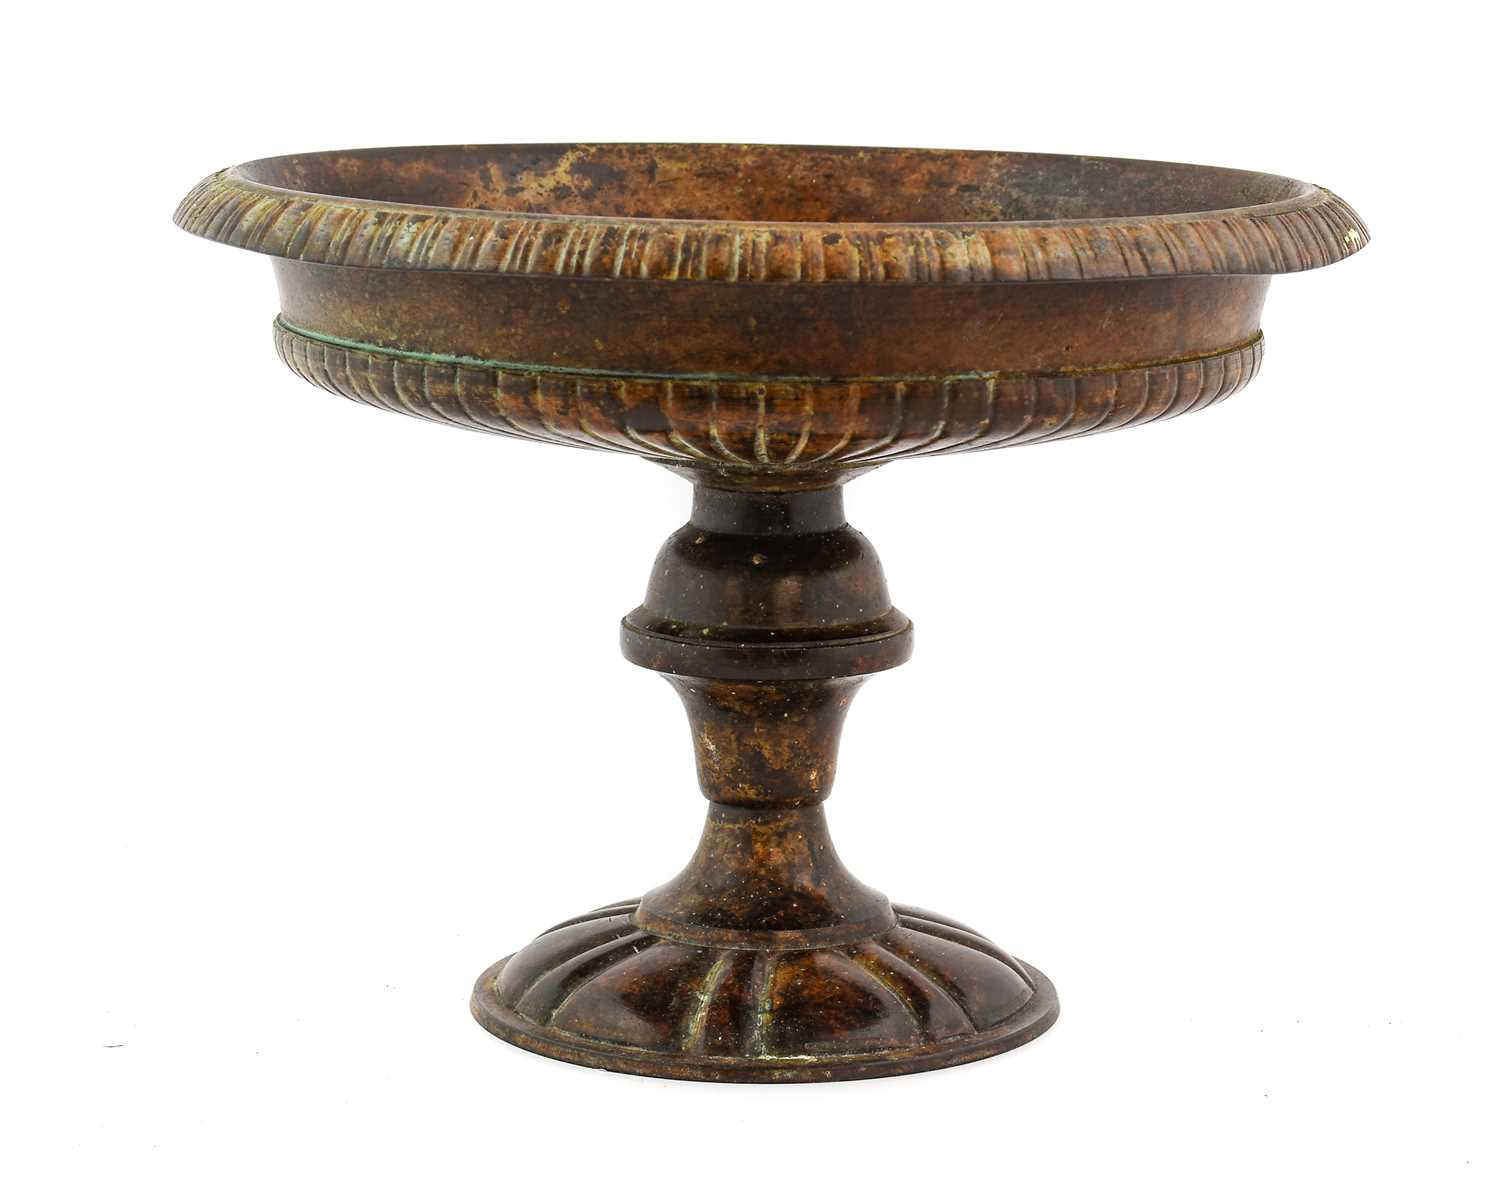 A Bronze Tazza, in Renaissance style, of campana form with gadrooned rim, knopped stem and fluted